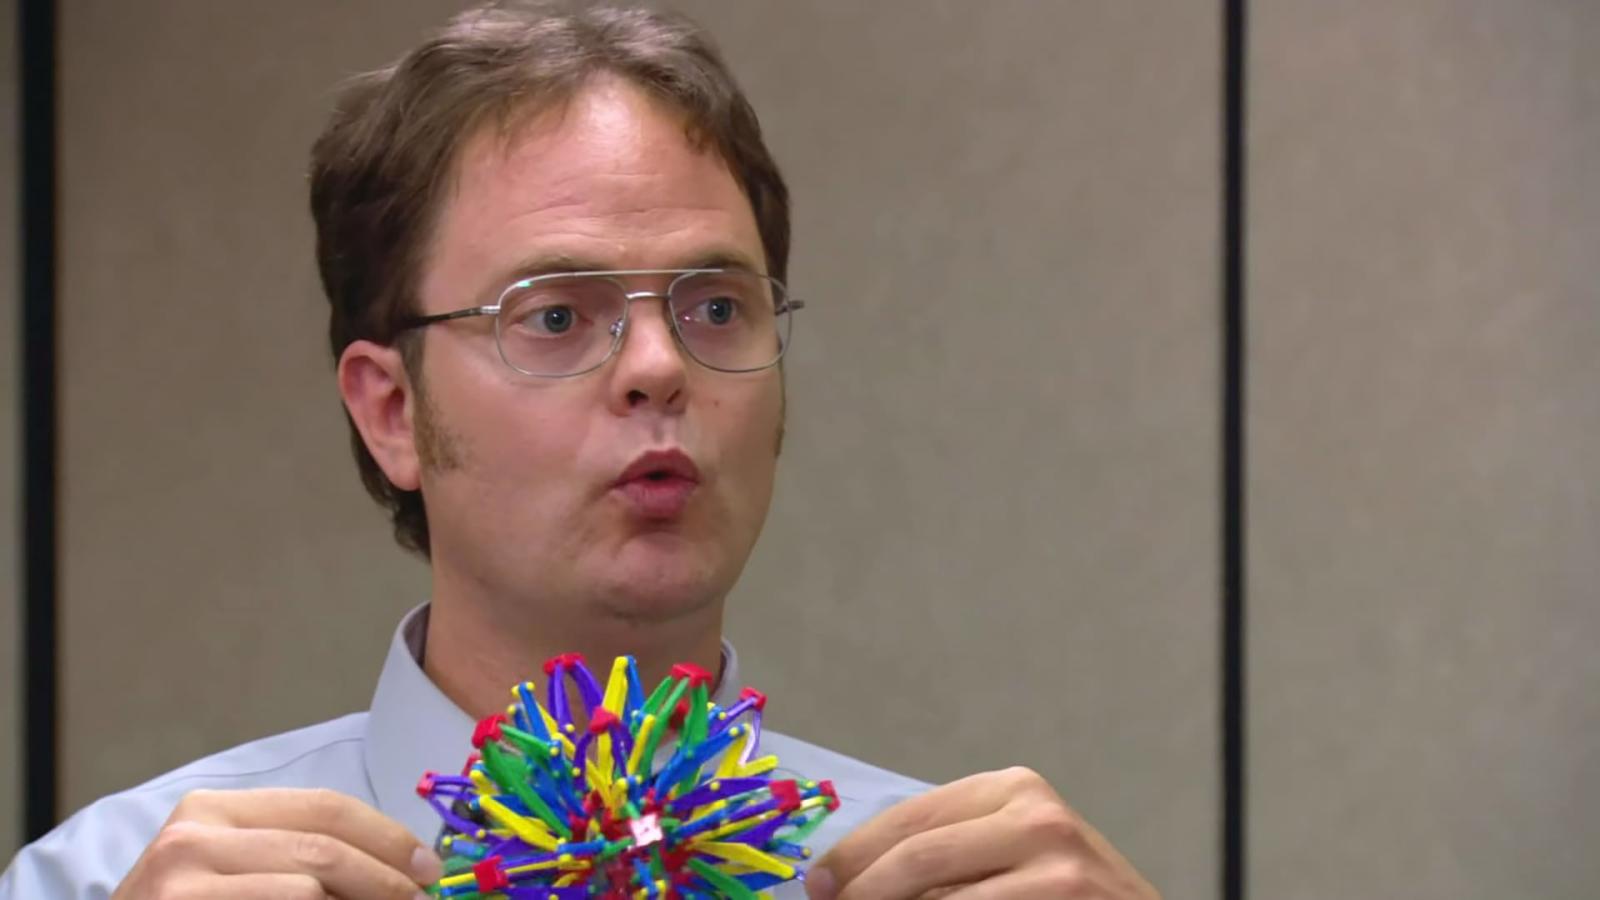 Find Out Which 'The Office' Employee You Are Based on Your Zodiac Sign - image 10